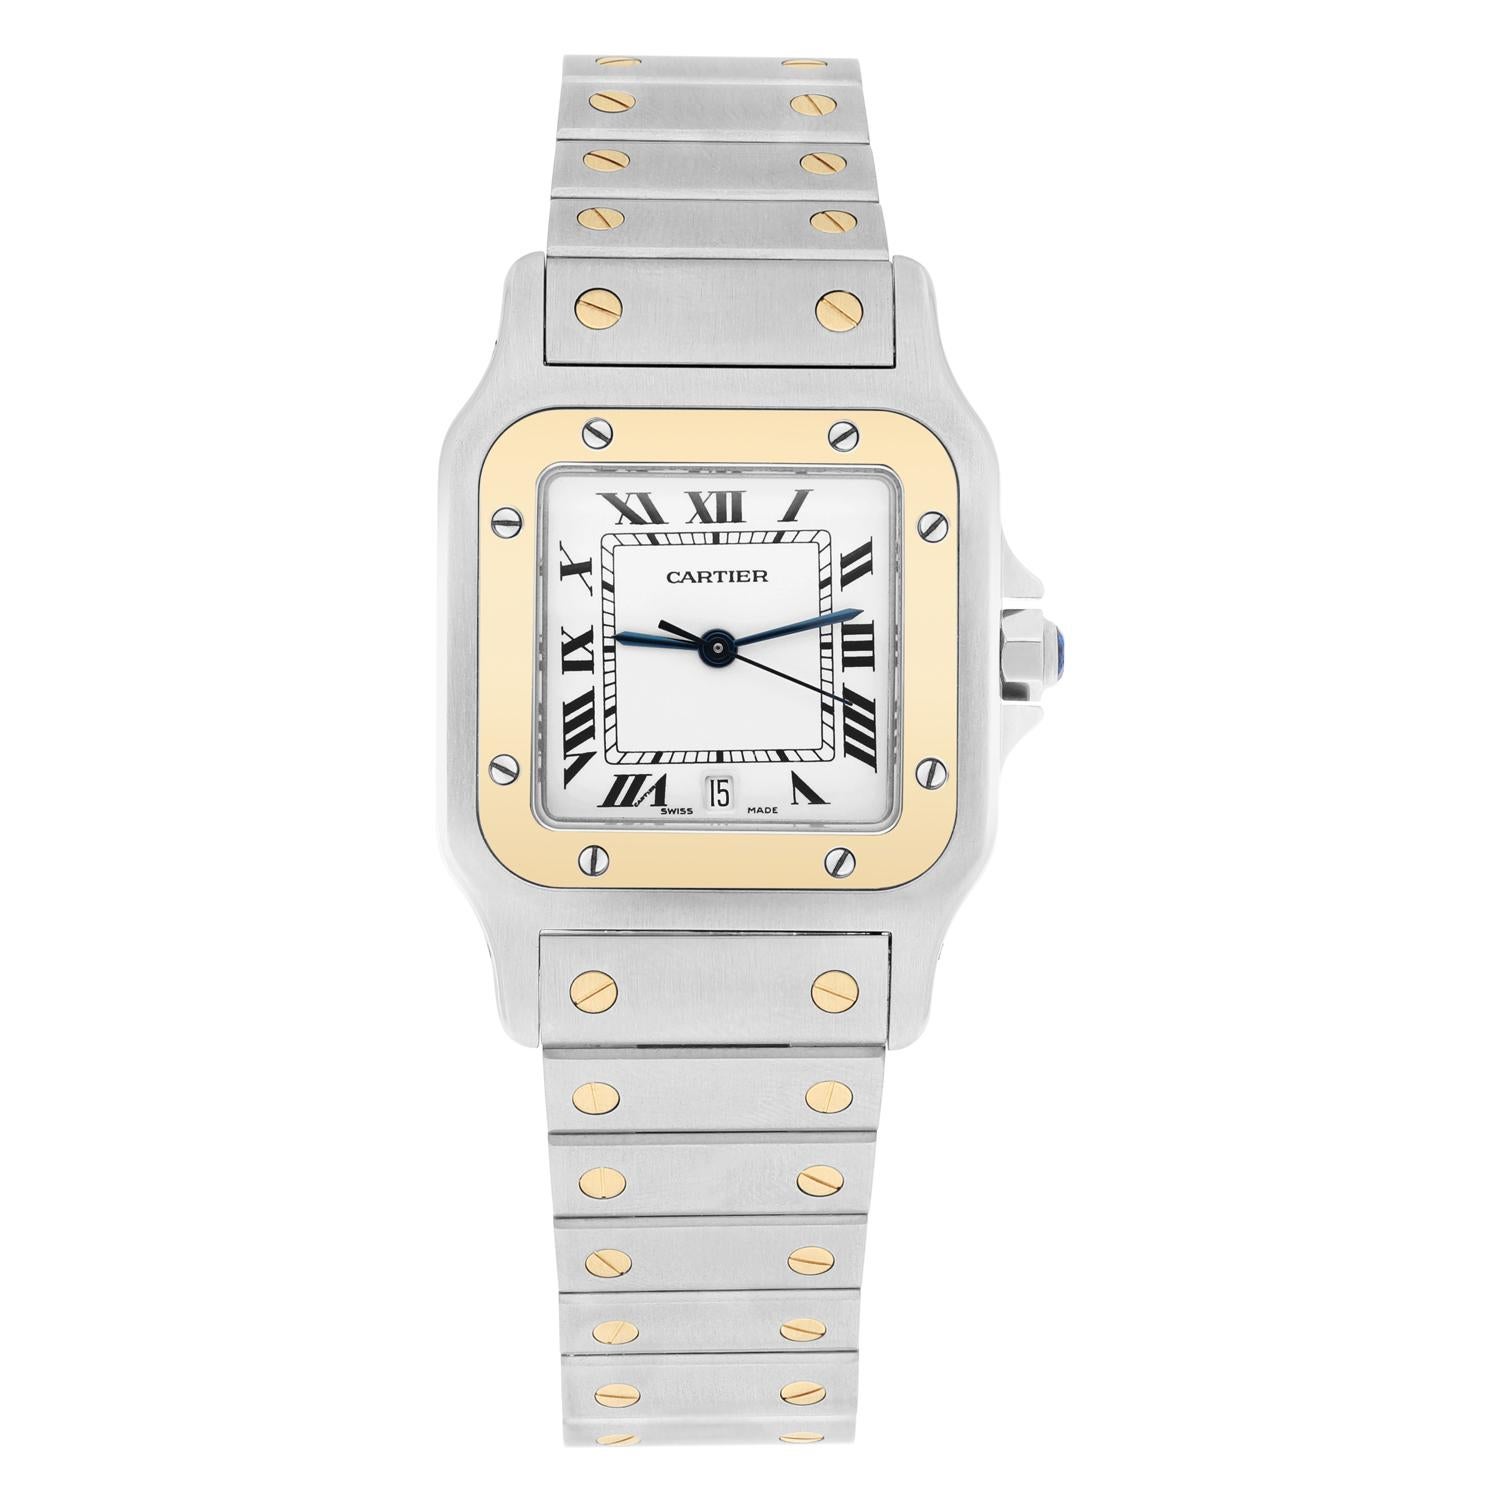 Elevate your style with this stunning Cartier Santos Galbee wristwatch. Crafted from high-quality stainless steel and elegant yellow gold, this luxury timepiece boasts a fixed bezel in a bold yellow color, with Roman numeral indices on a silver